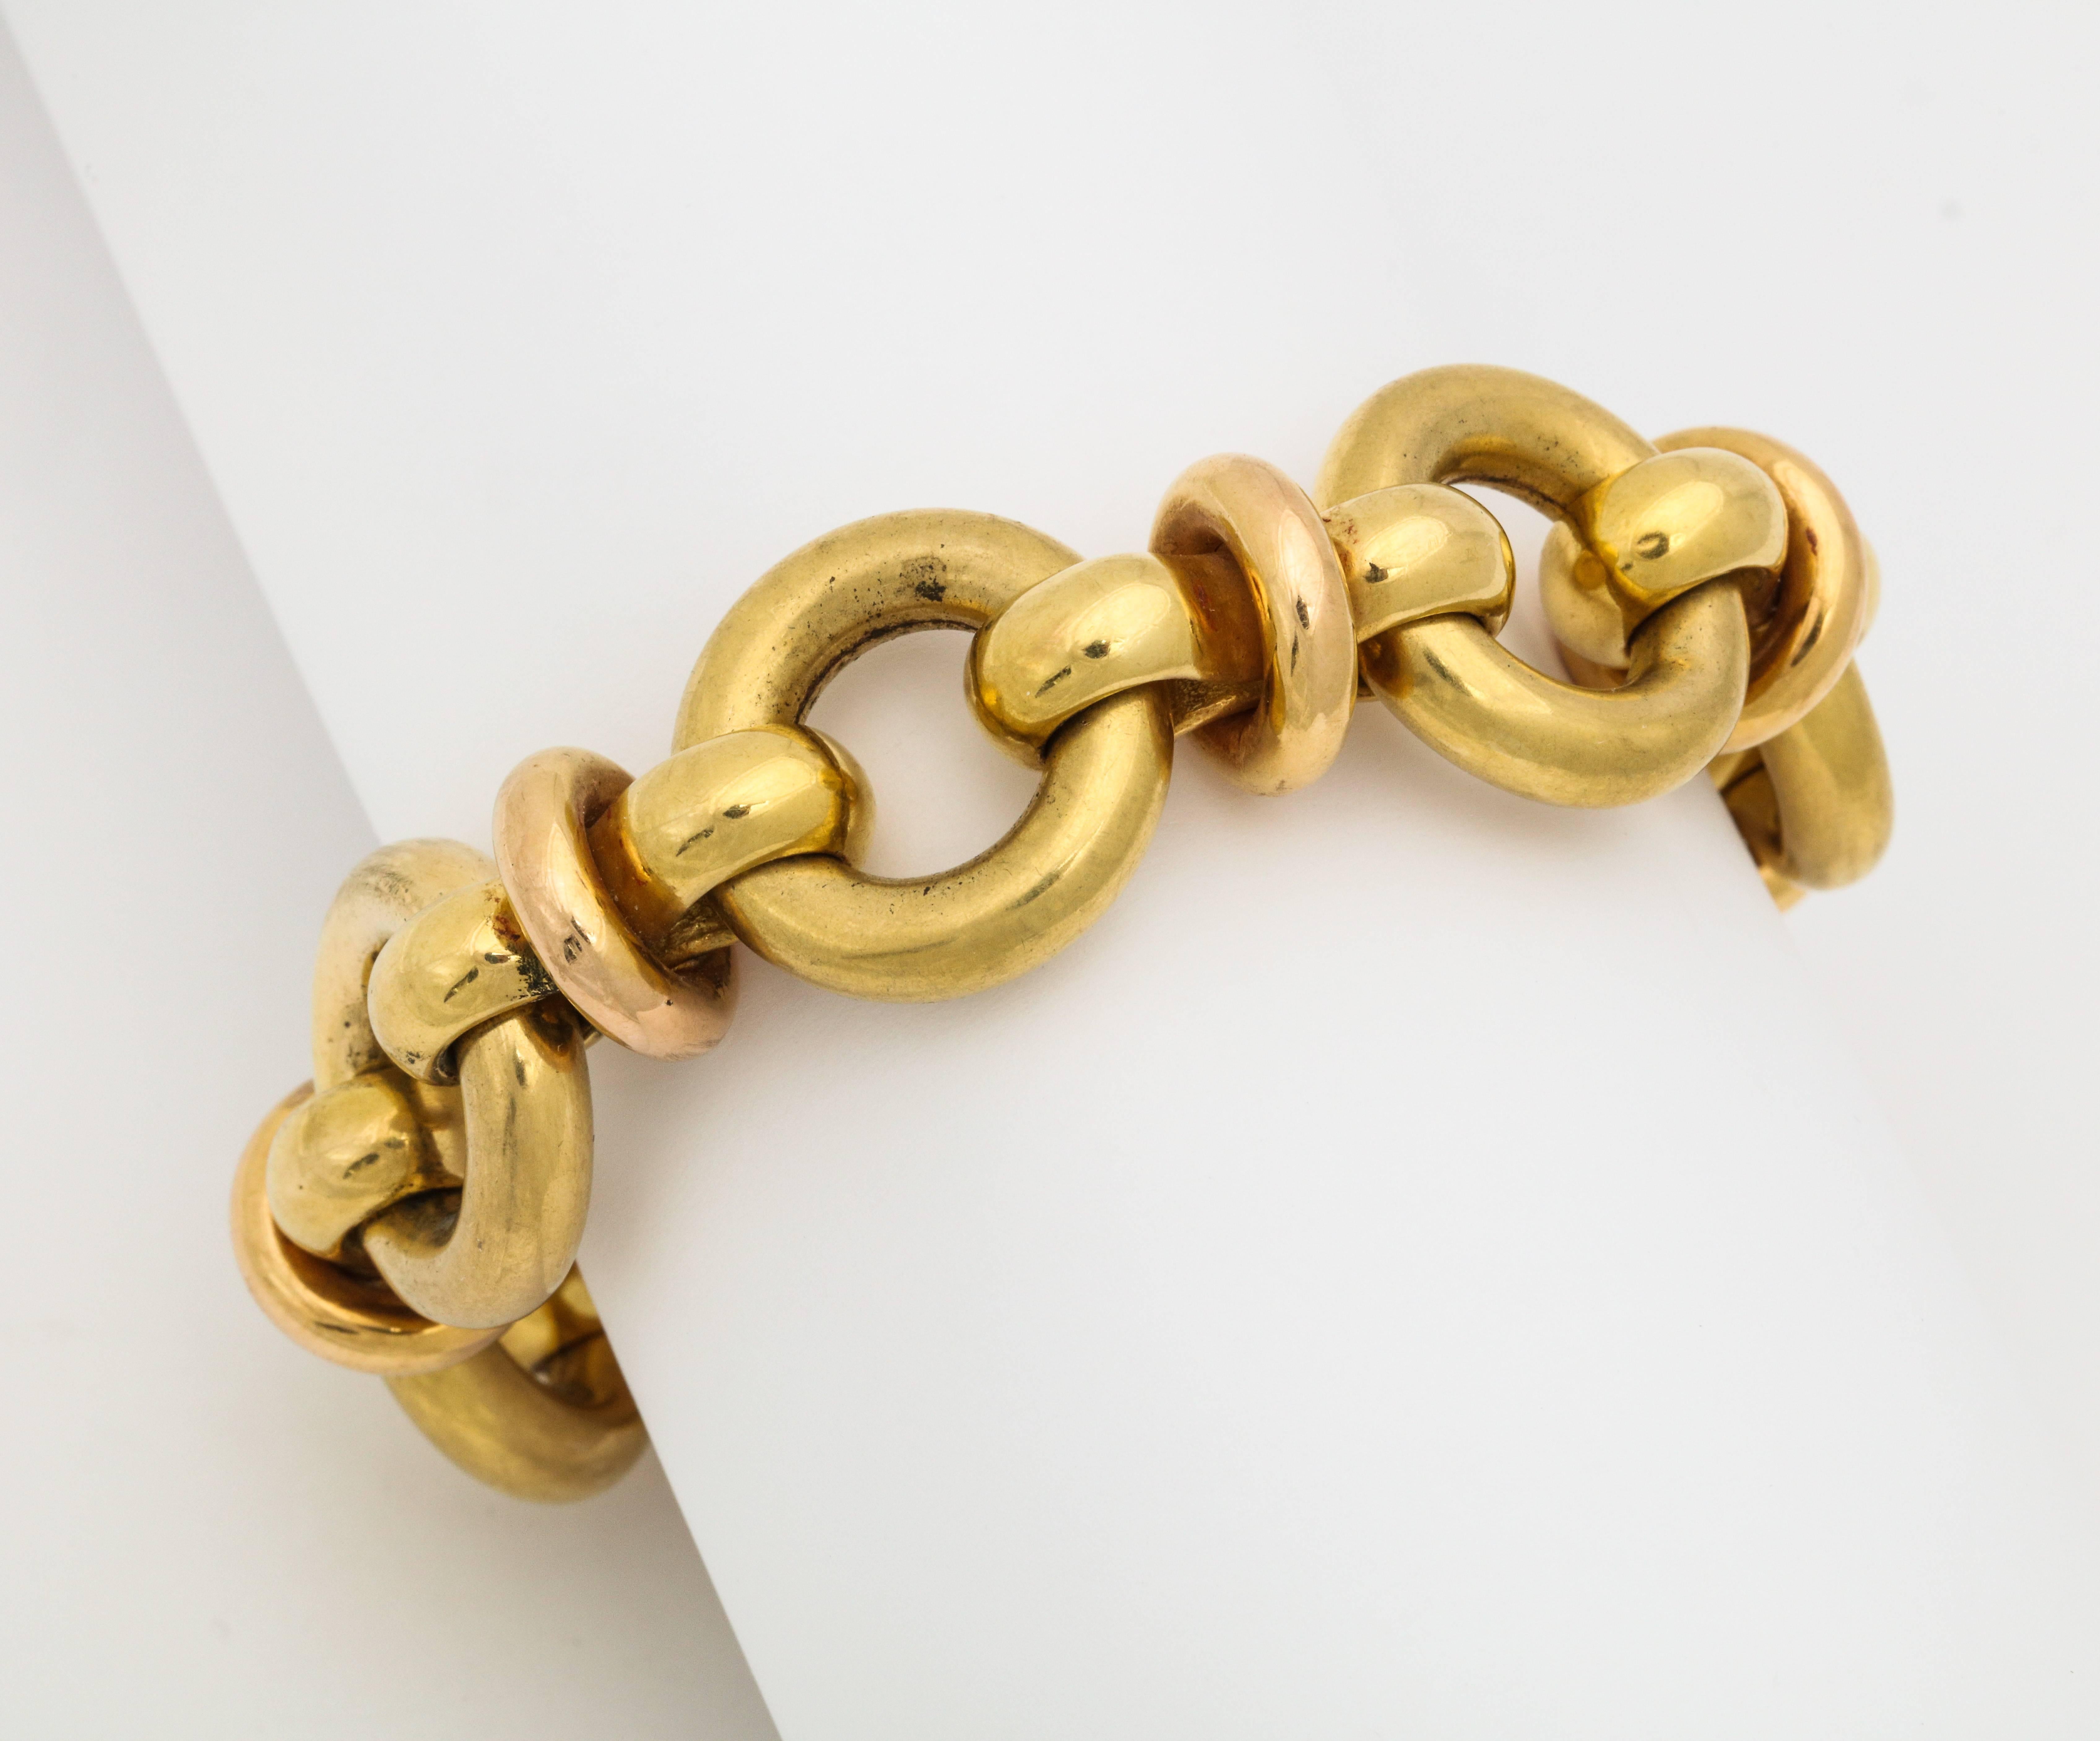 A stunning Design  Retro 18K  gold  Italian open link bracelet with an invisible clasp   This is a strong design and has great presence.